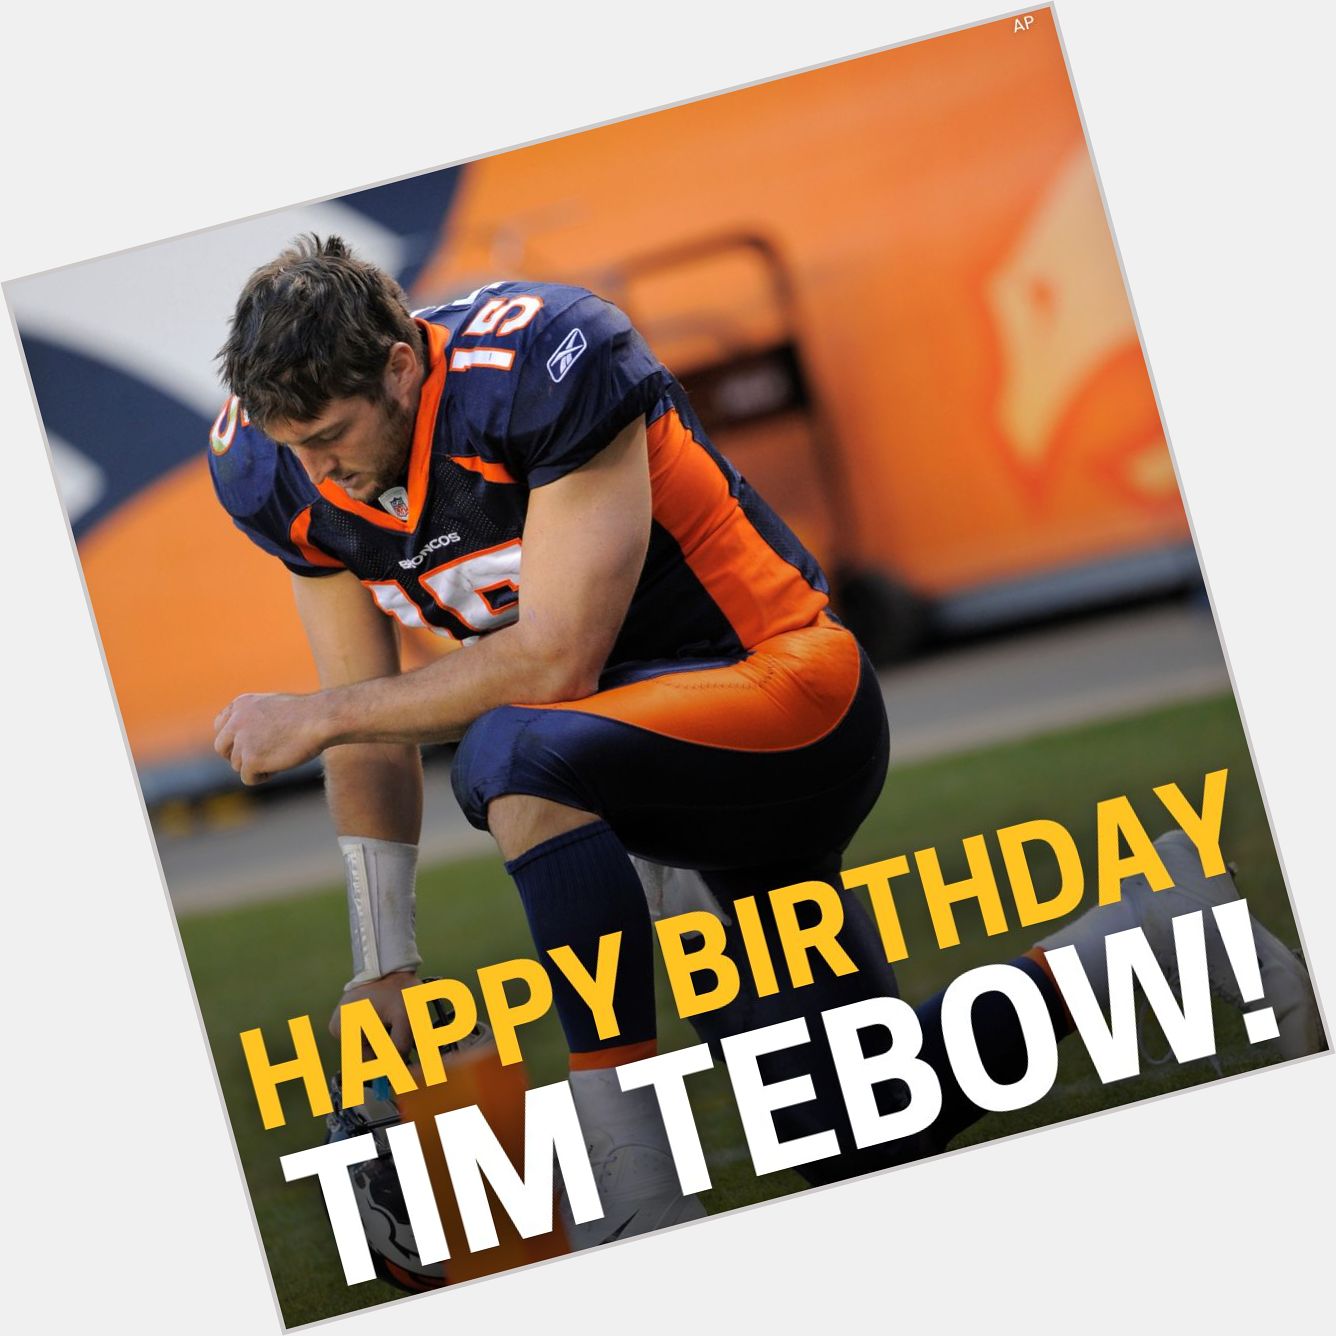 Happy birthday, Tim Tebow! He turns 35 today! 